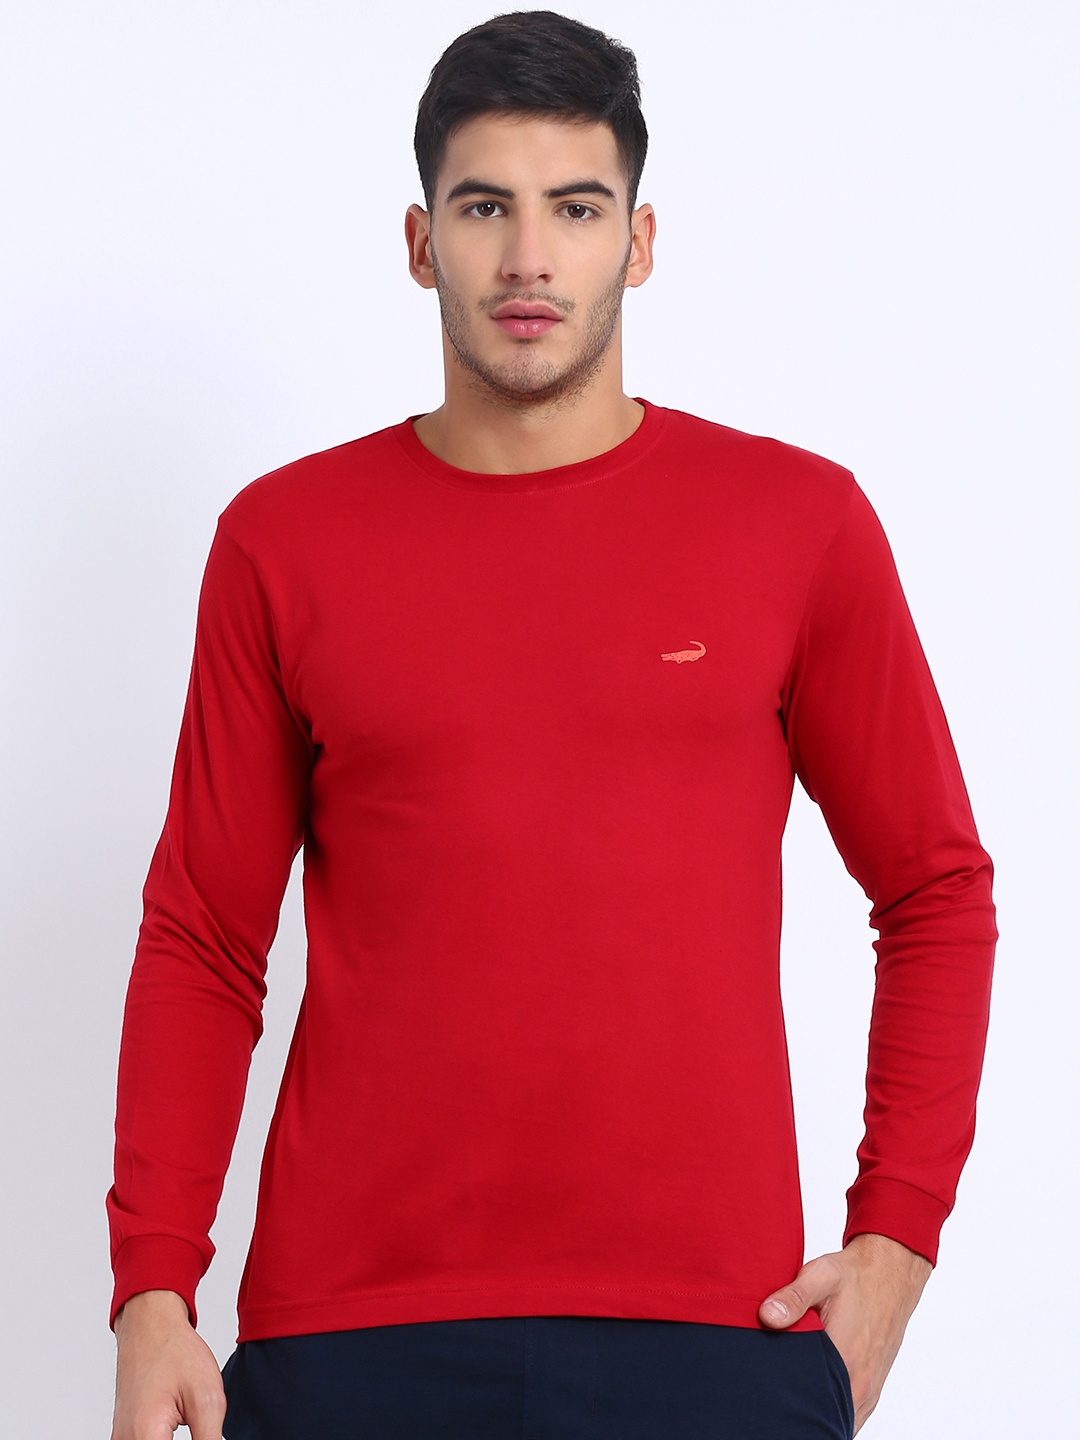 Buy Crocodile Men Red Solid Round Neck T Shirt - Tshirts for Men ...